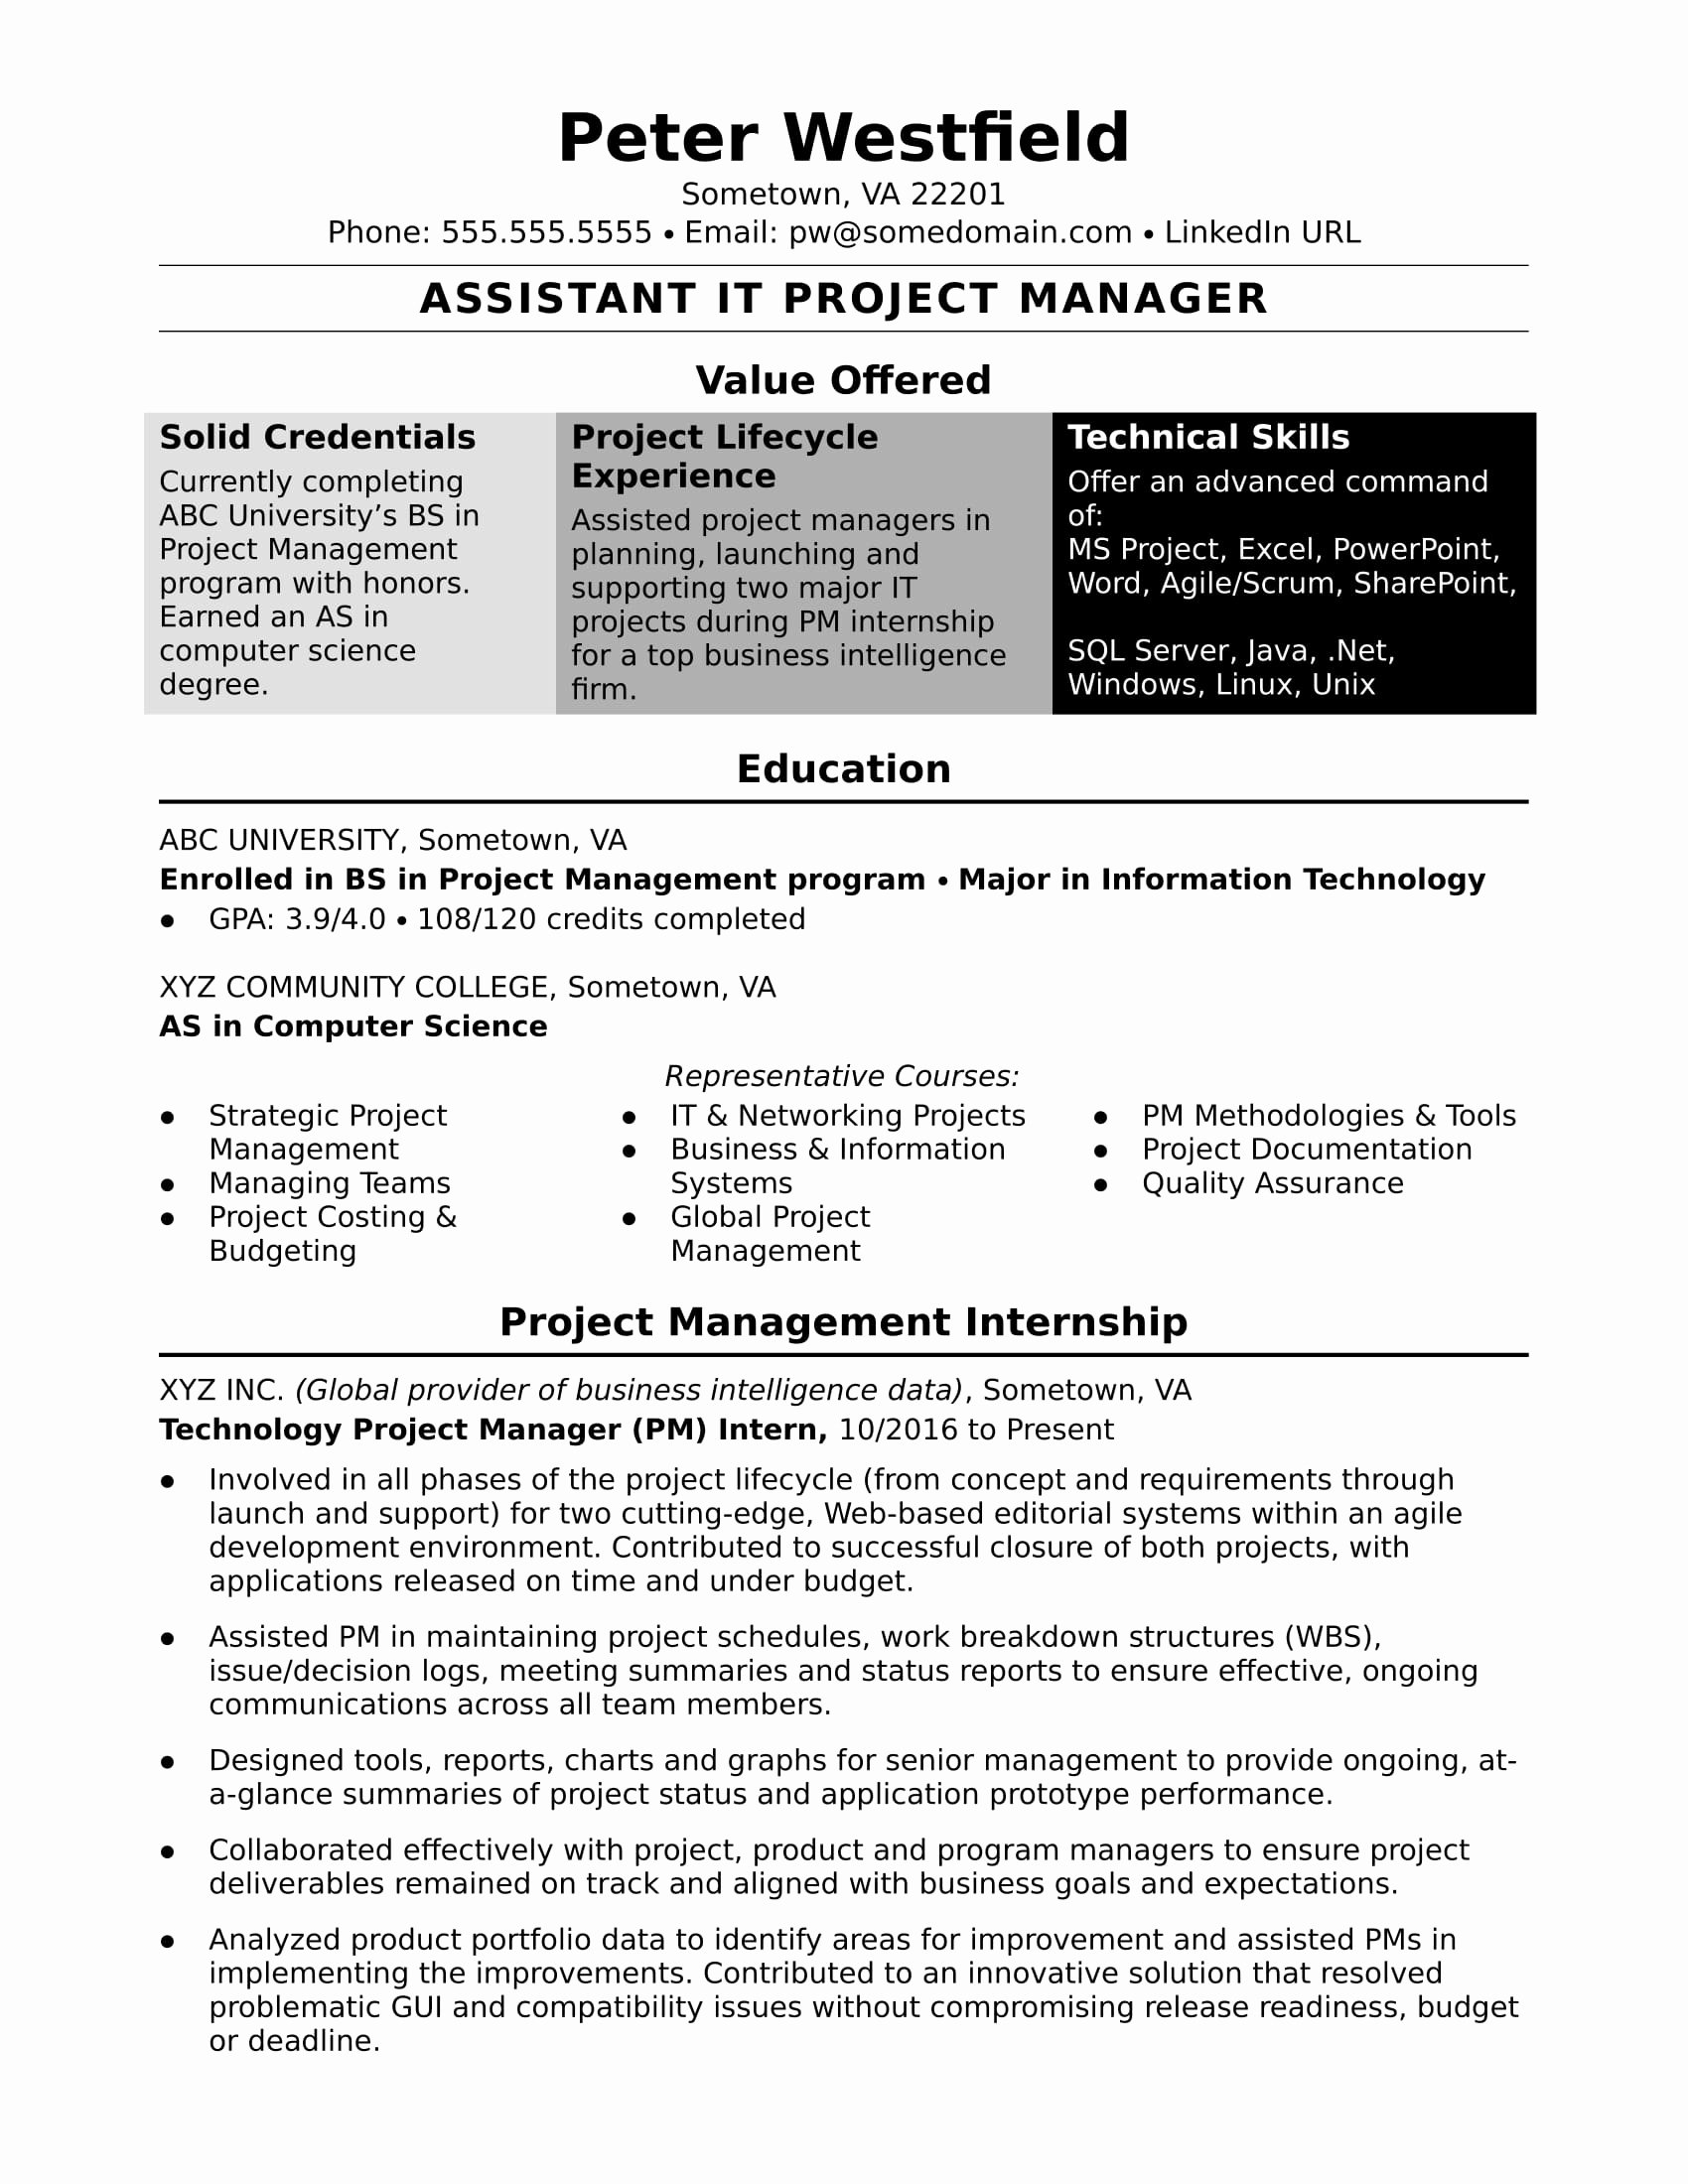 Sample Resume for An assistant It Project Manager